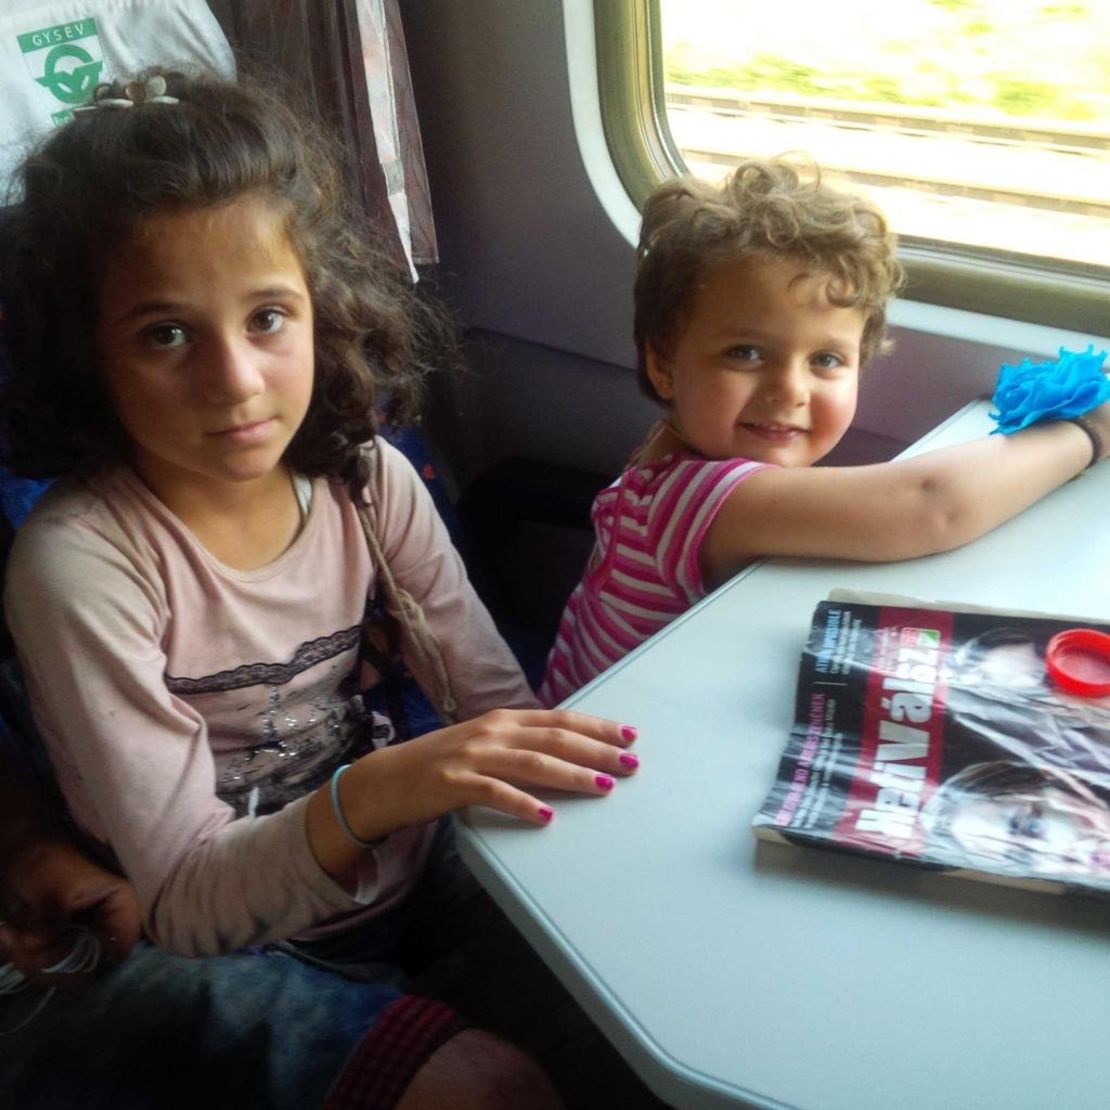 Rym, 8, and Birlnt, 2 1/2, on the train as it starts to move.